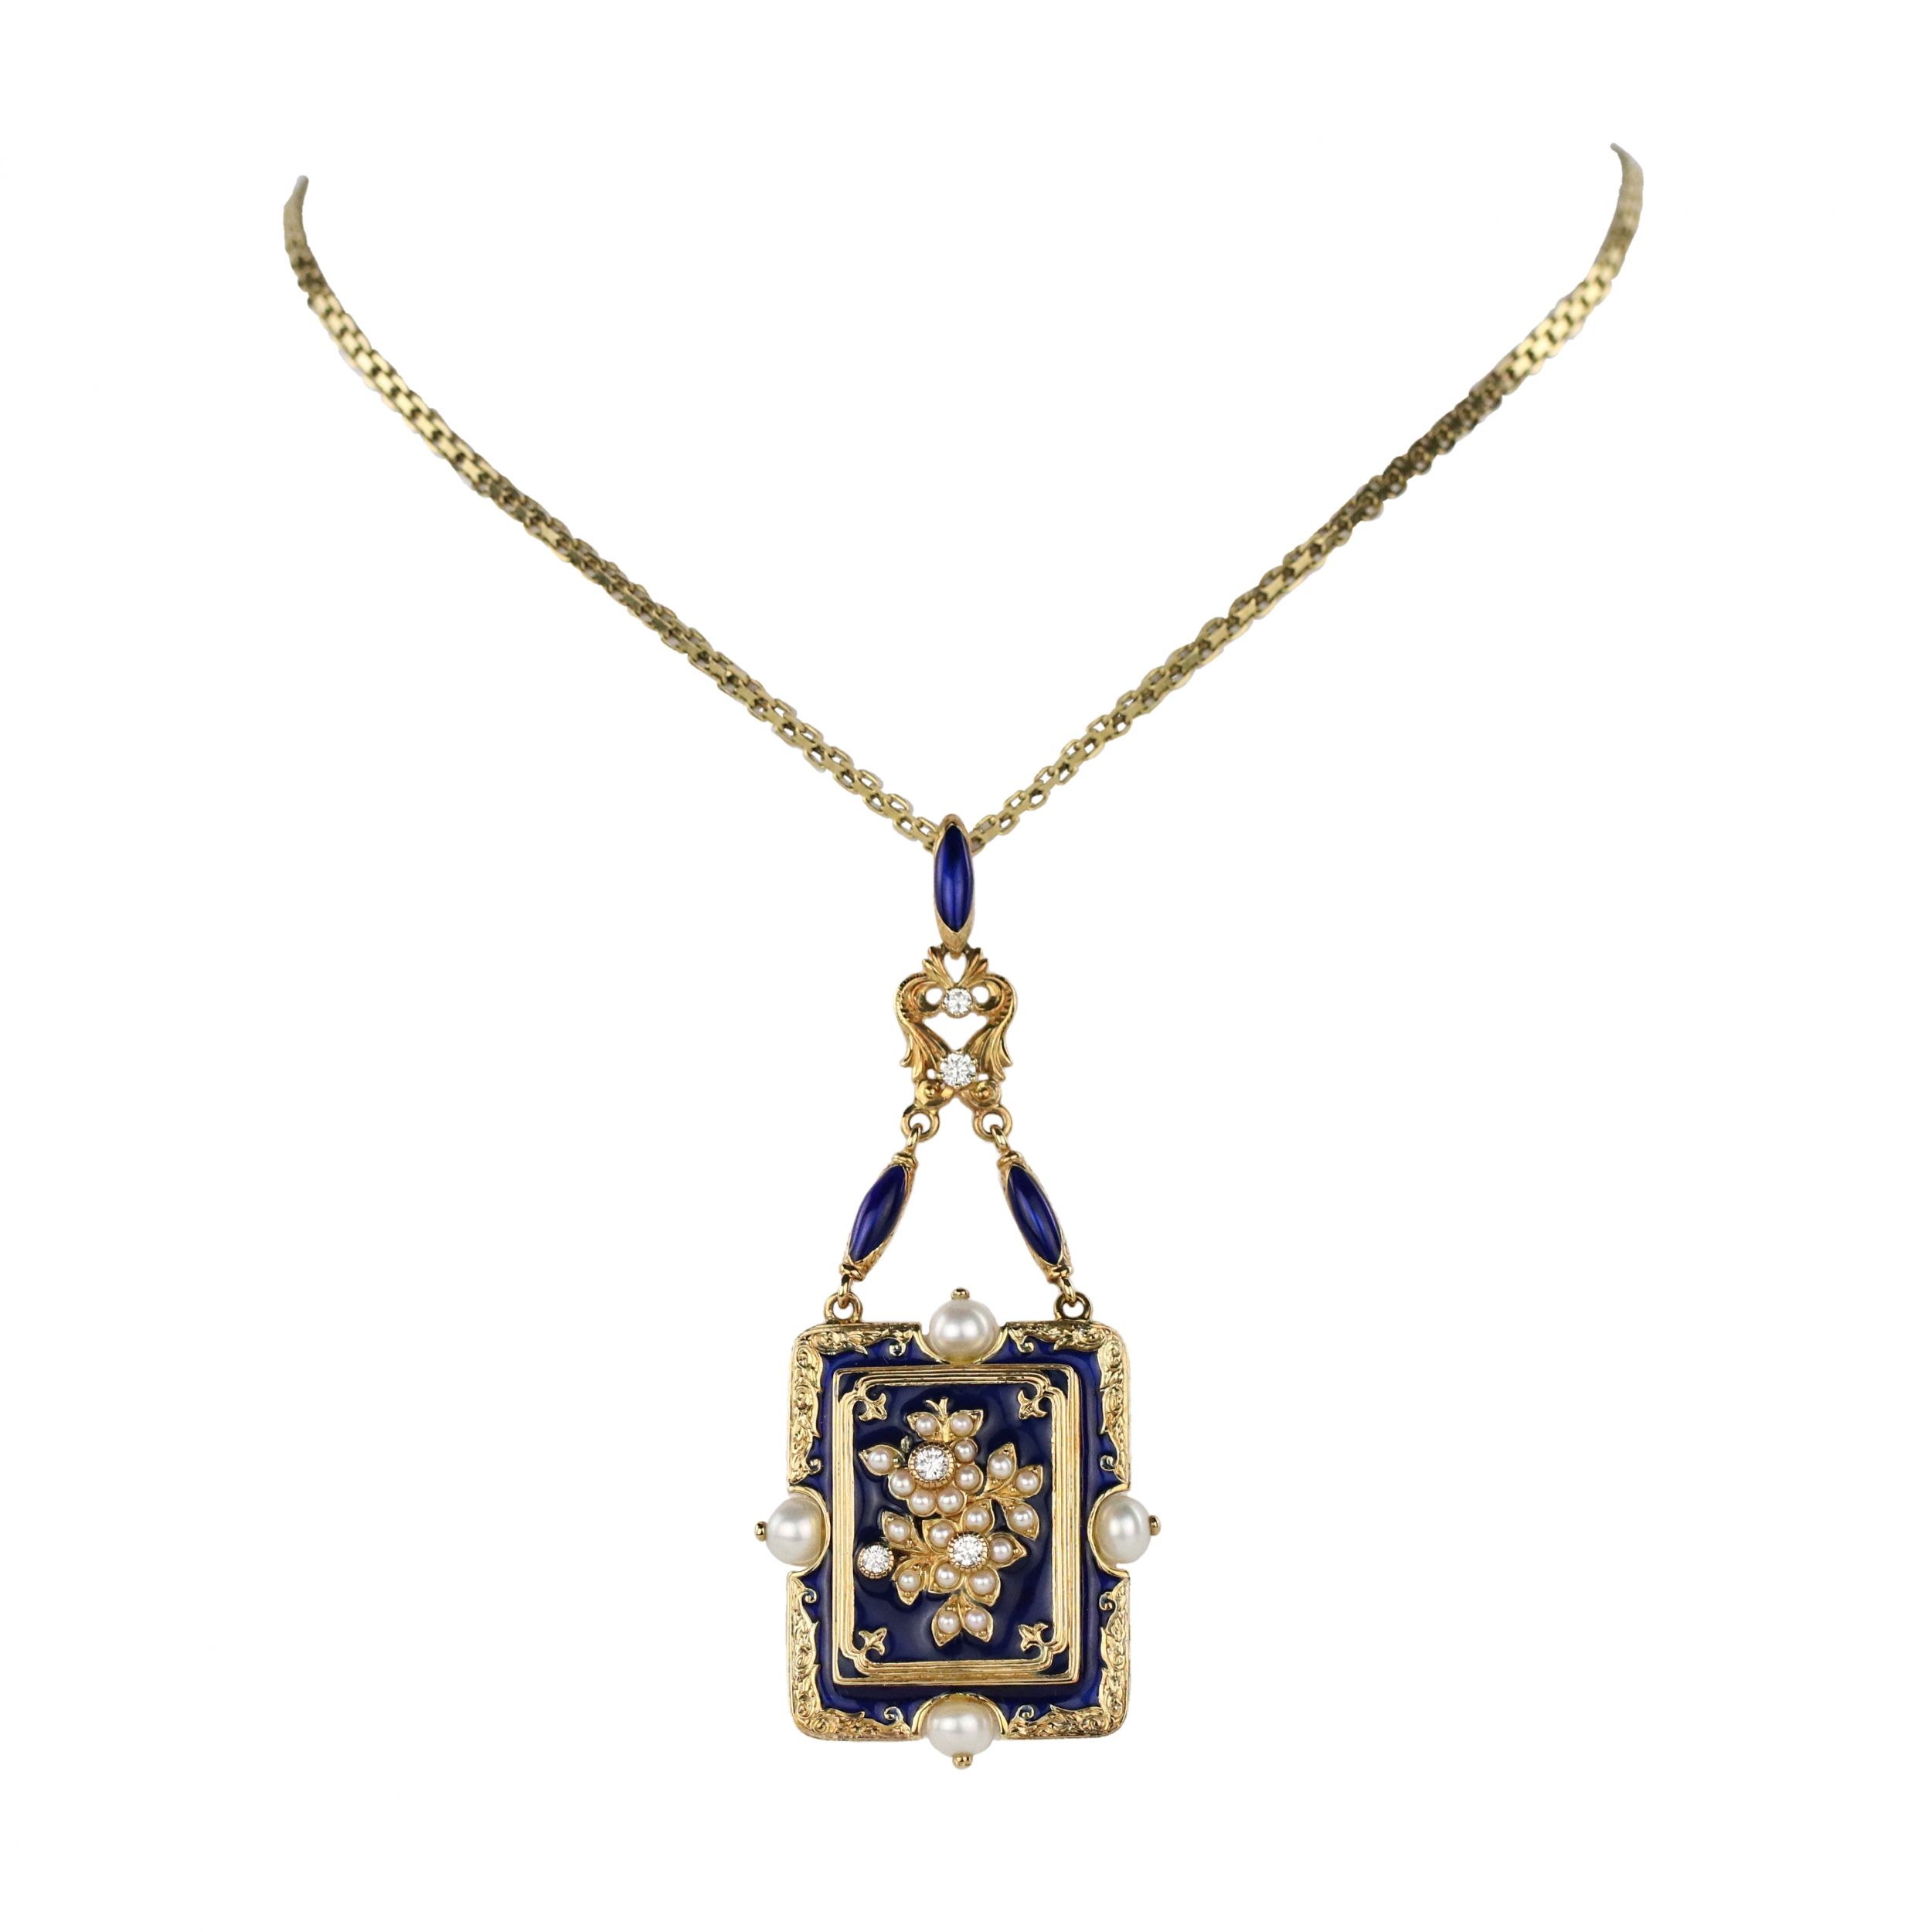 Vintage-gold-pendant-with-pearls-diamonds-and-enamel-